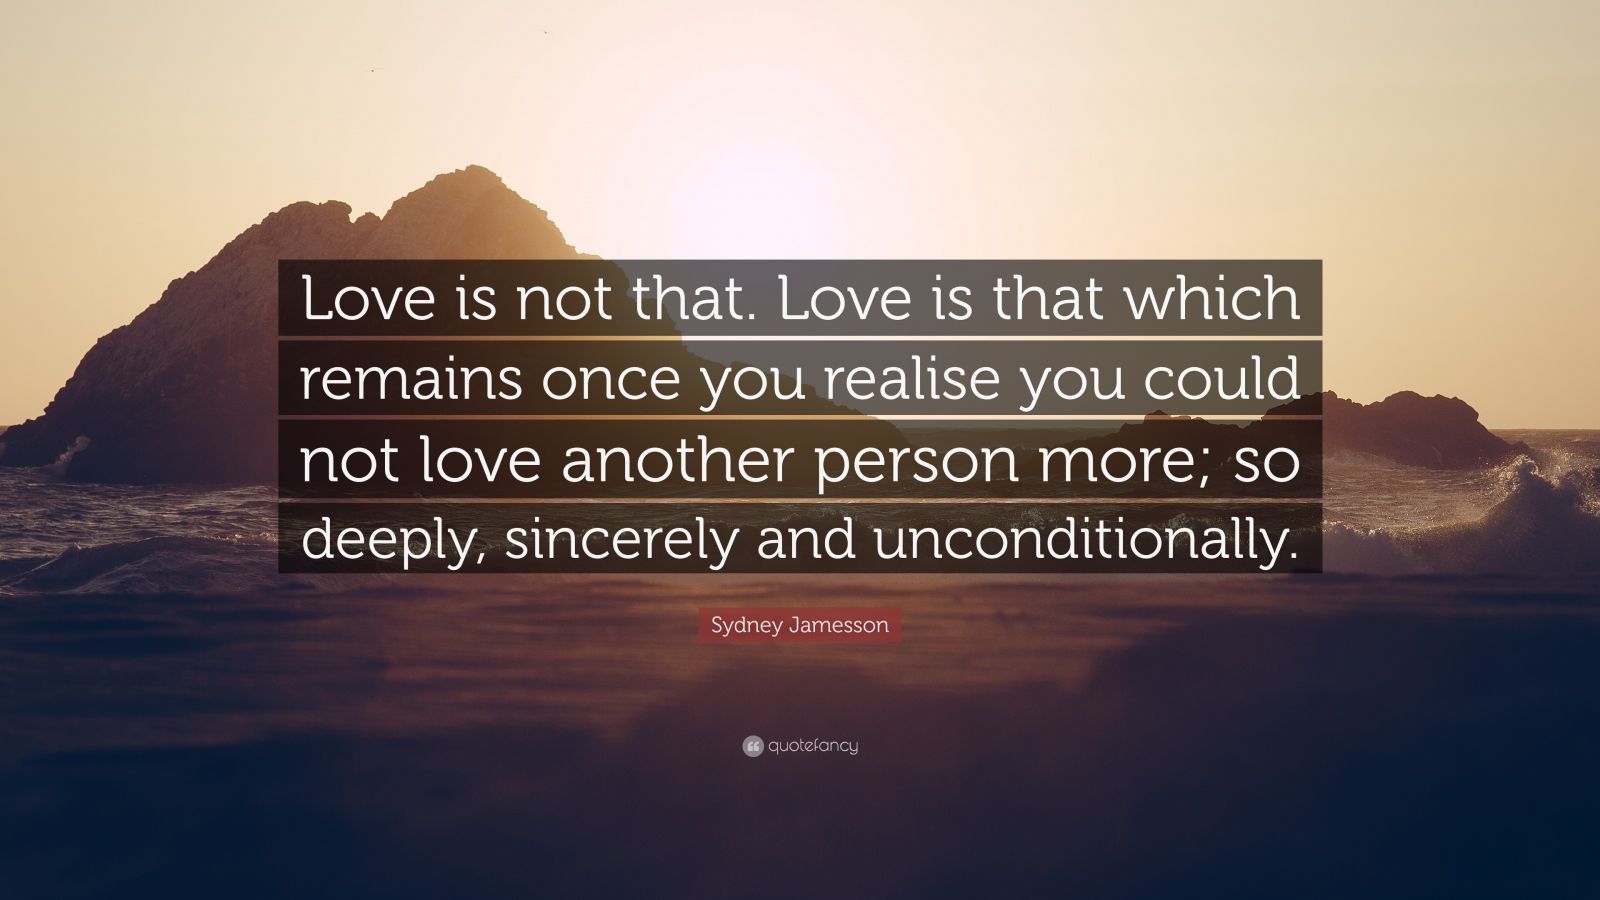 Sydney Jamesson Quote: “Love is not that. Love is that which remains ...